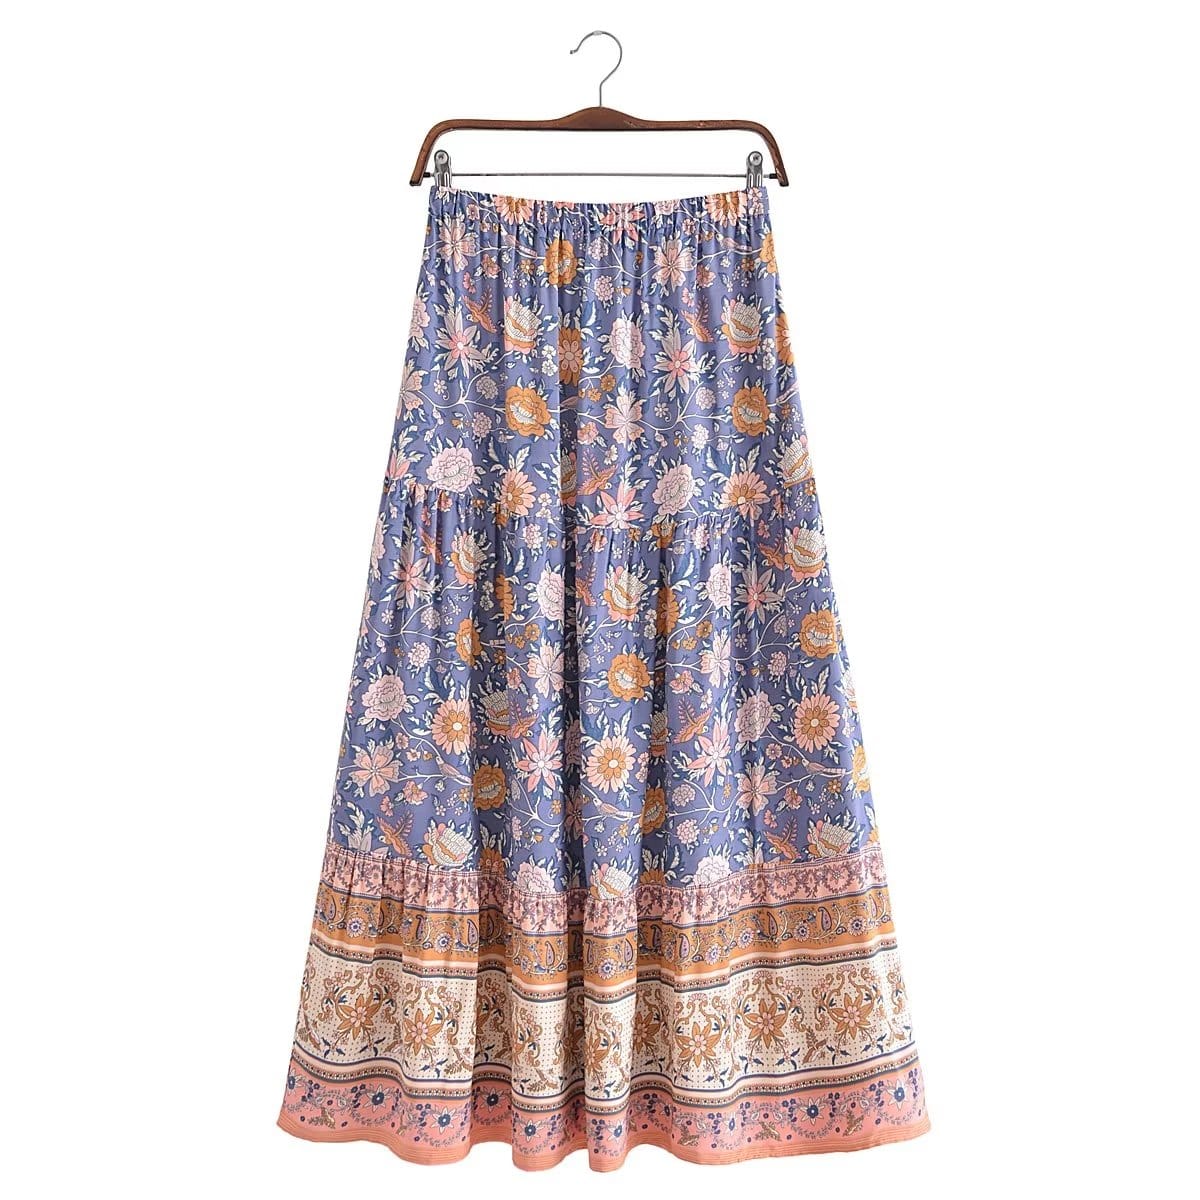 Zara floral print blouse with maxi skirt, Chic Wish nude pleated